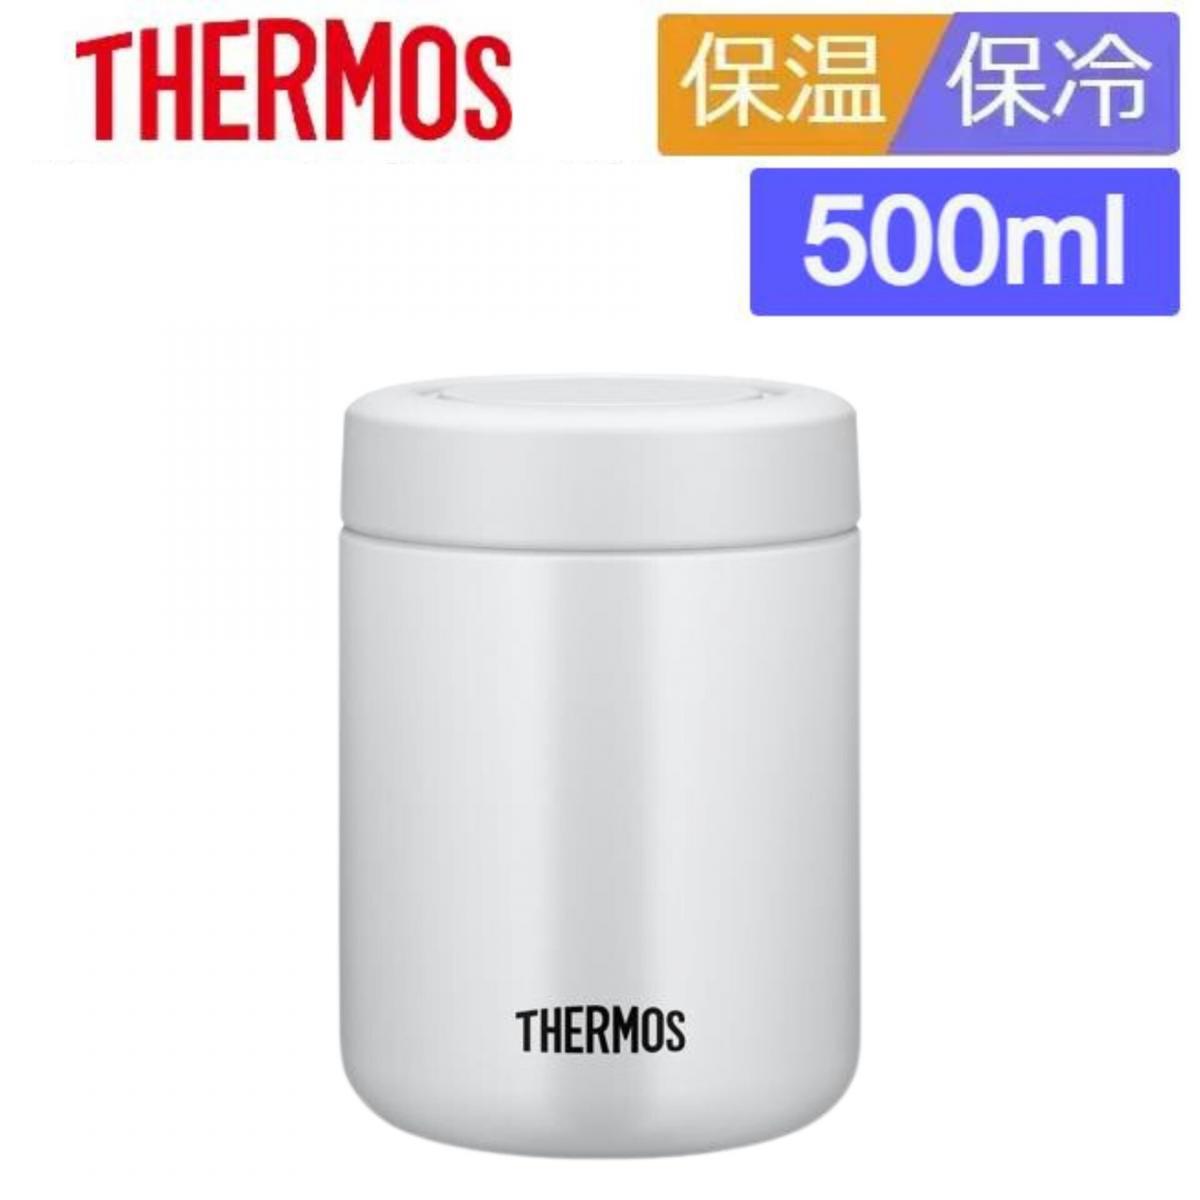 Stainless Steel Vaccum thermal Insulated Food Jar Food Container 500ml White JBR-500